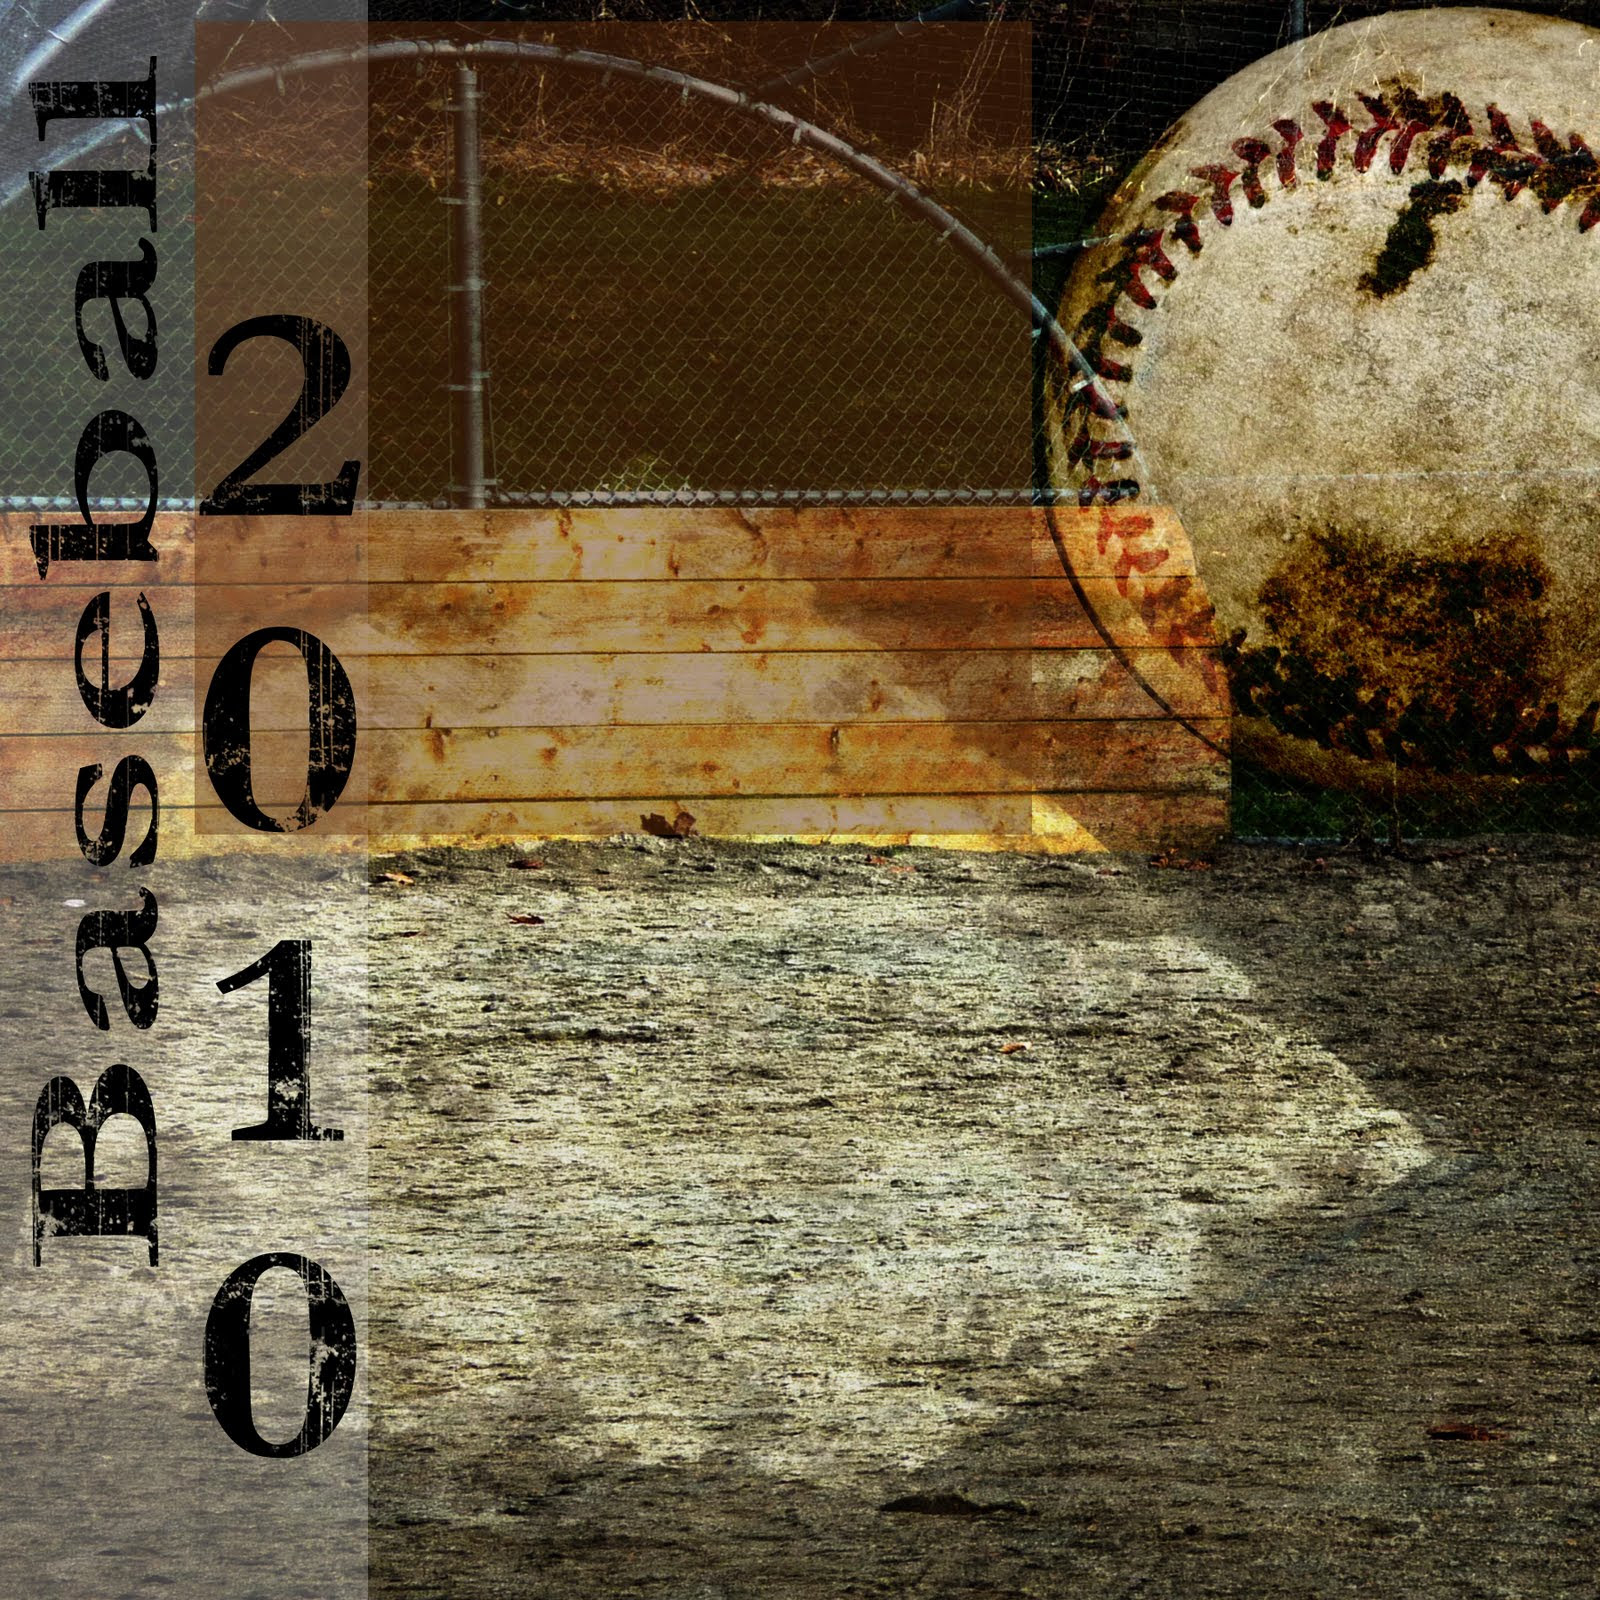 We have a massive amount of hd images that will make your computer or smartphone look absolutely fresh. 15 Baseball Backgrounds For Photoshop Images Photoshop Digital Backdrops Baseball Baseball Photoshop Digital Backgrounds And Free Baseball Templates Photoshop Newdesignfile Com